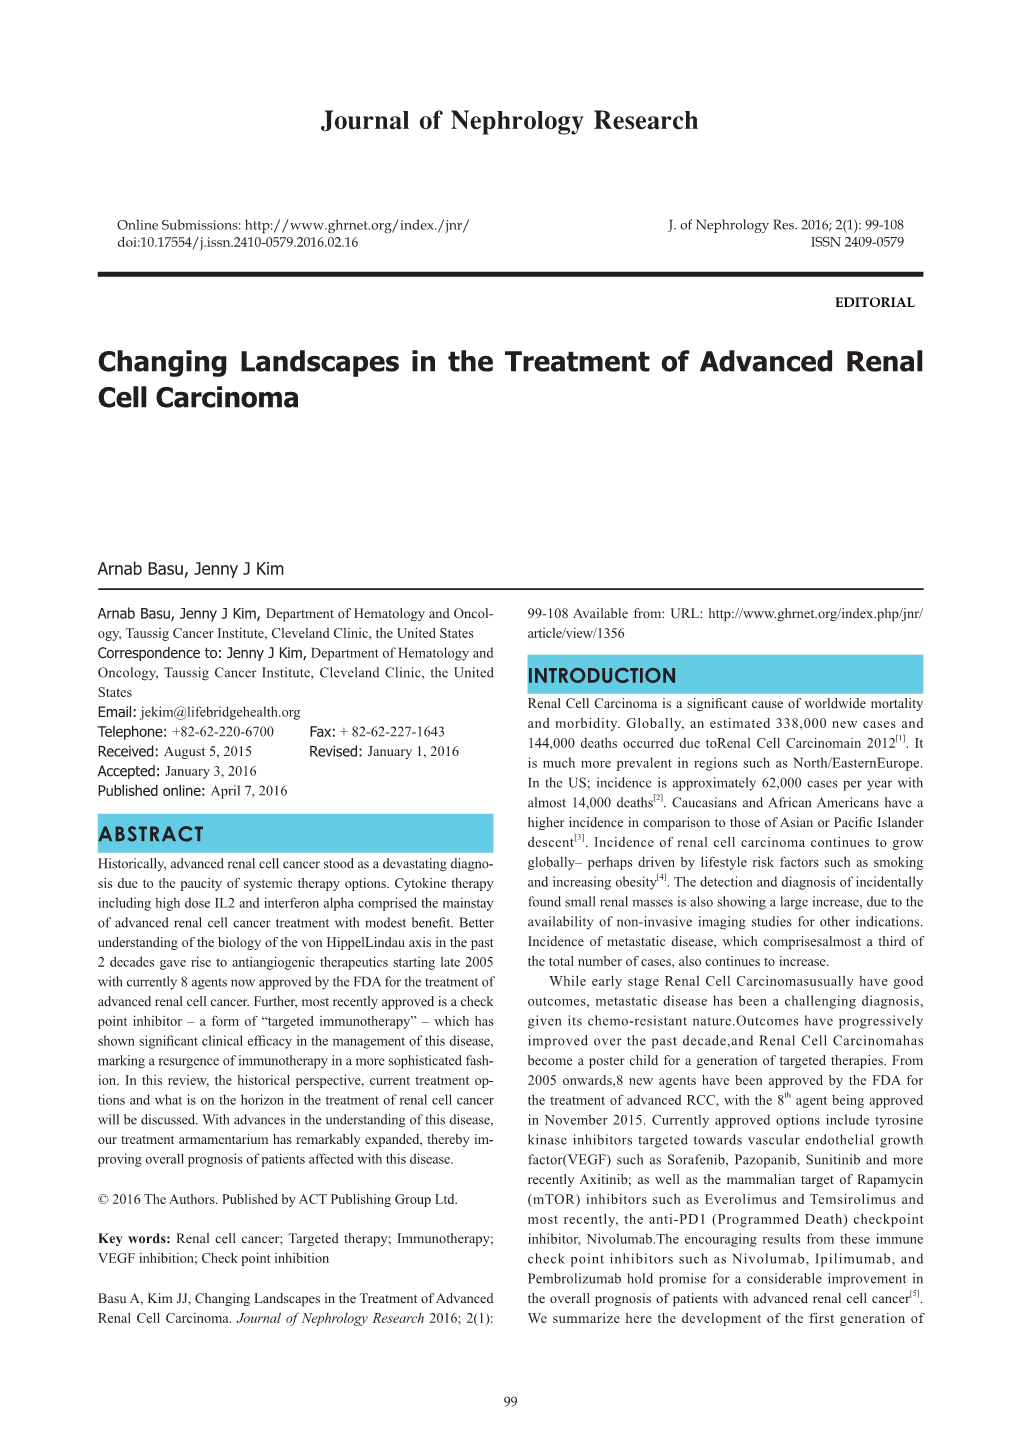 Changing Landscapes in the Treatment of Advanced Renal Cell Carcinoma